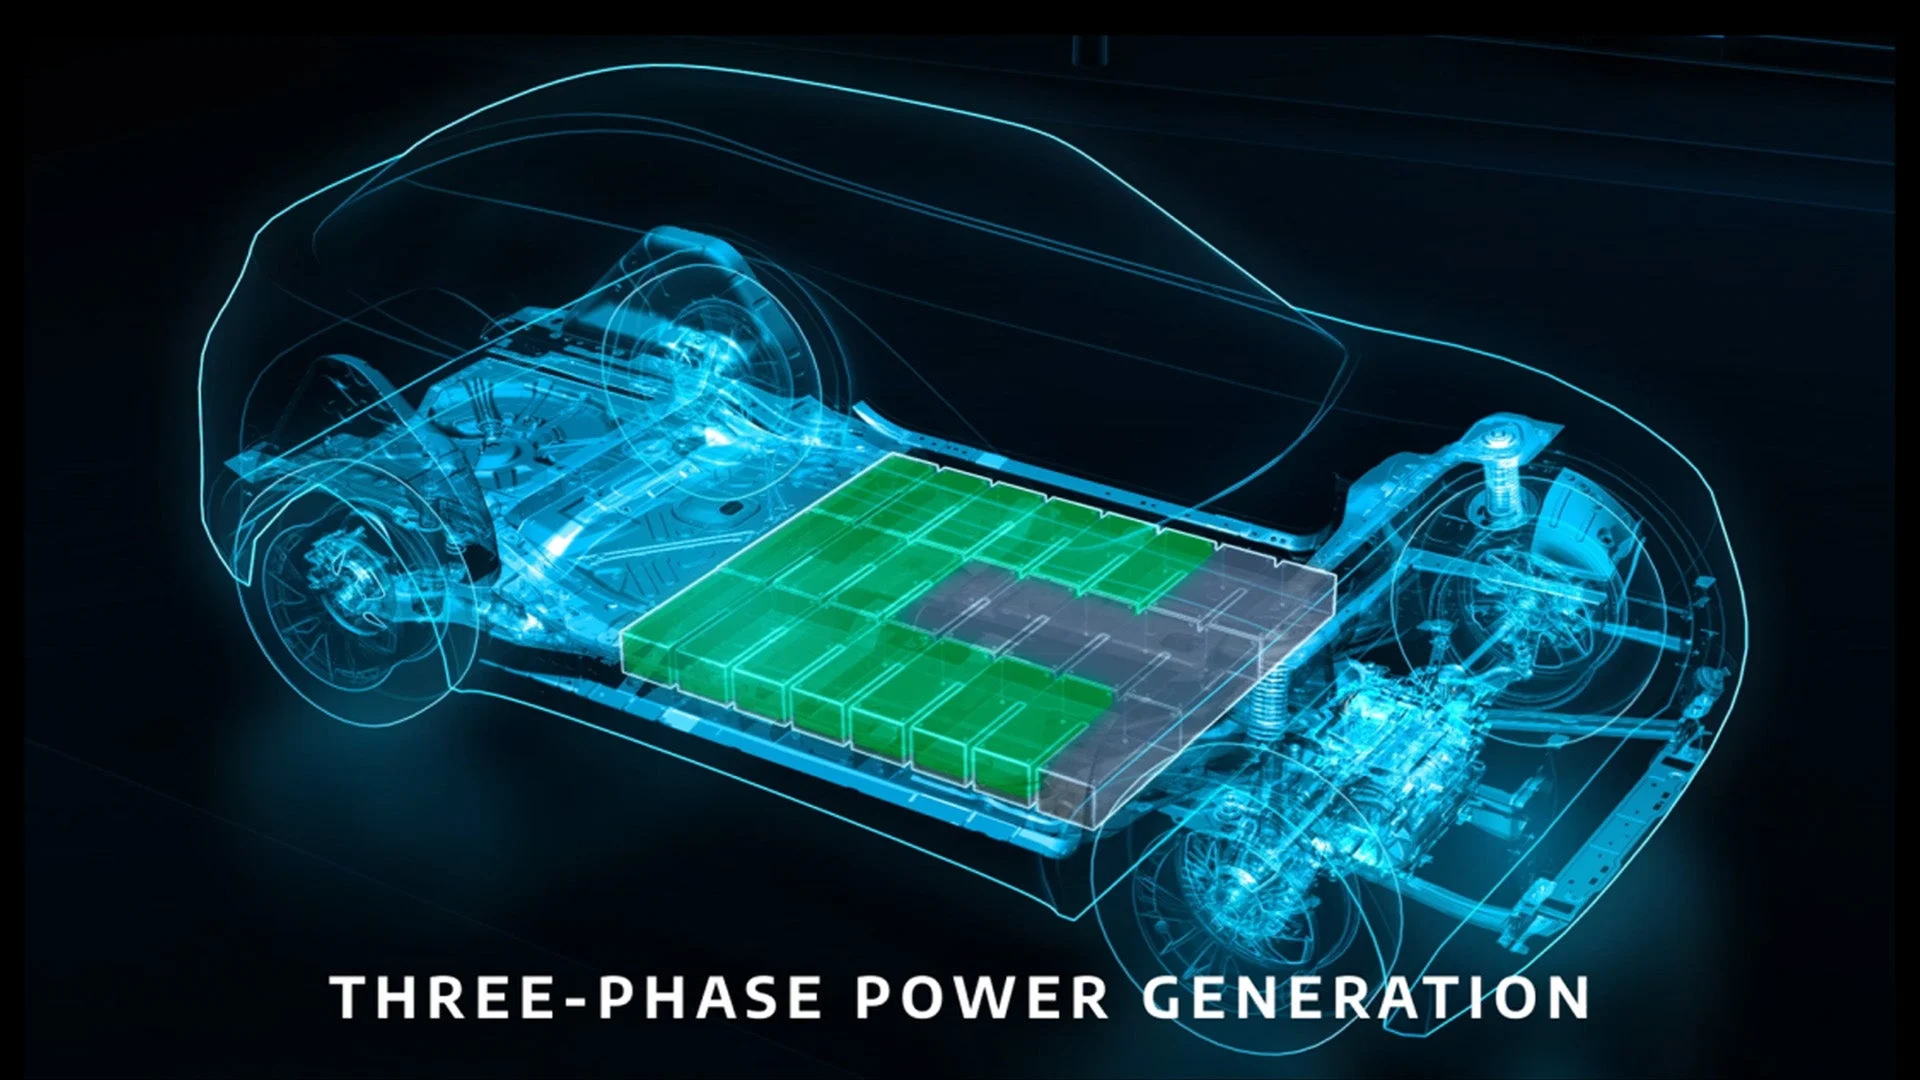 Stellantis Unleashes Game-Changing Battery: Empowering Smaller, Affordable EVs